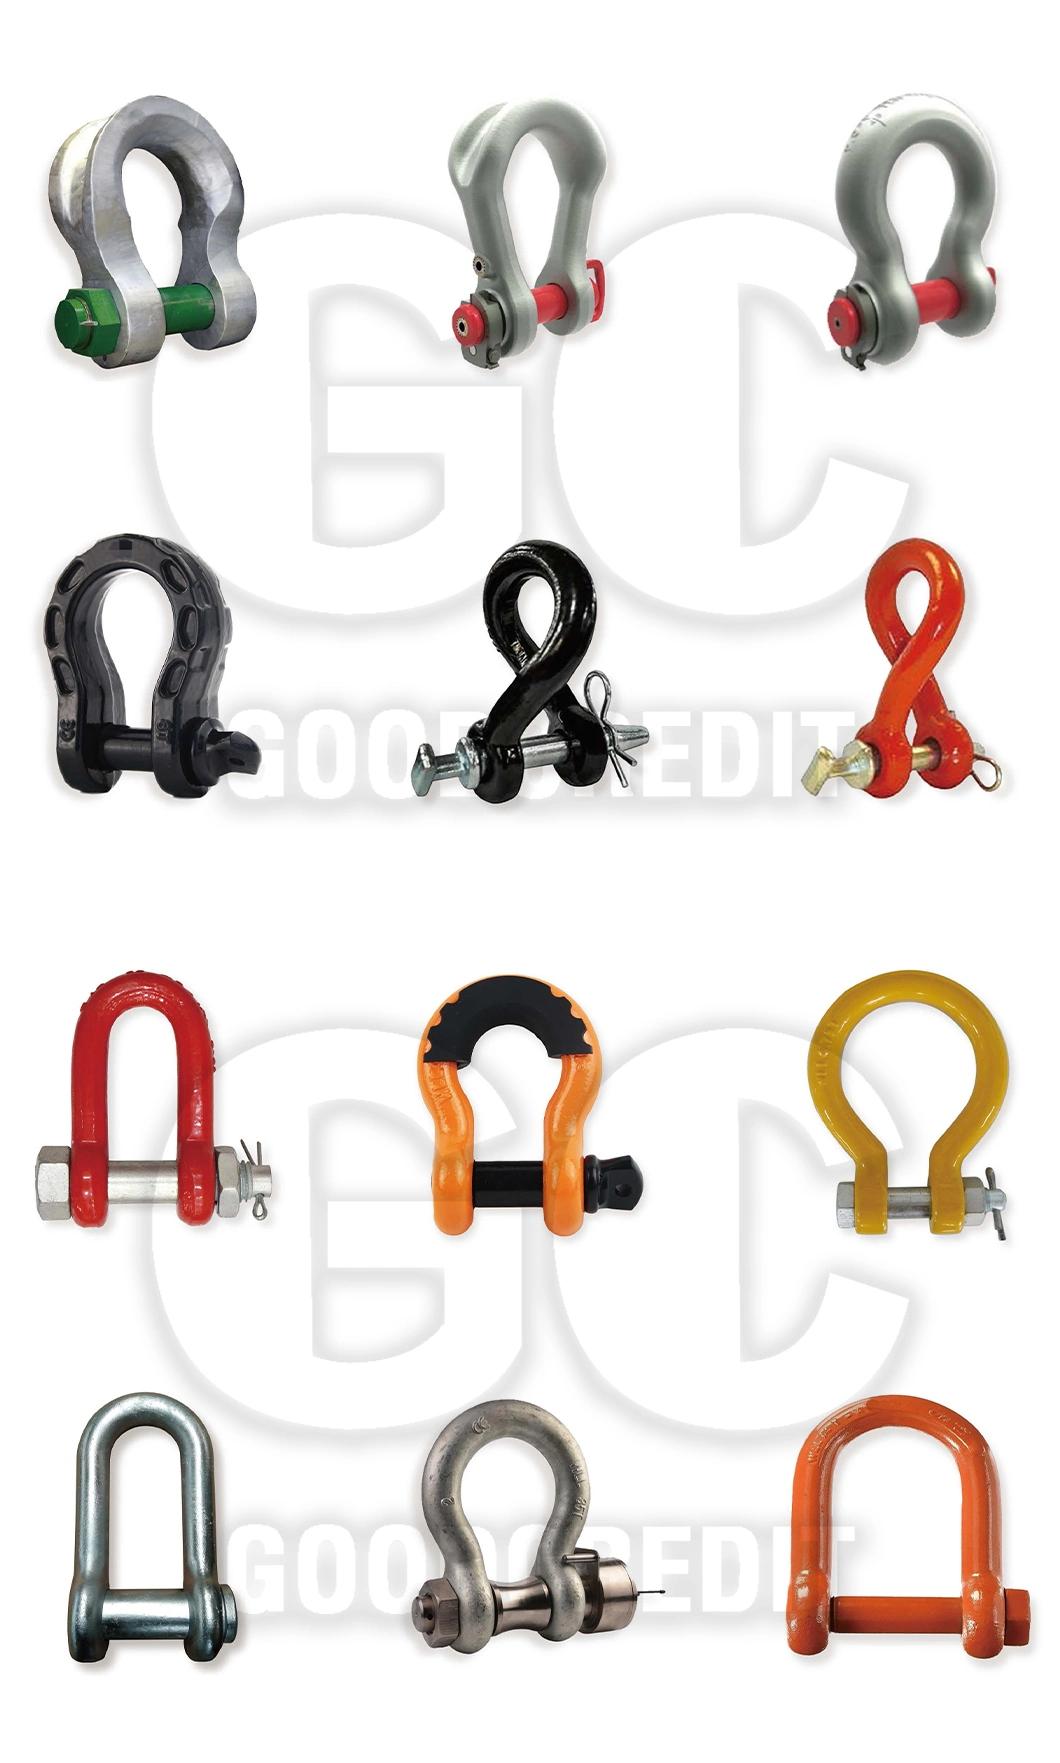 Wholesale Screw Pin Forged European Type D Shackle for Boat/Yacht/Ship Price Boat Accessories